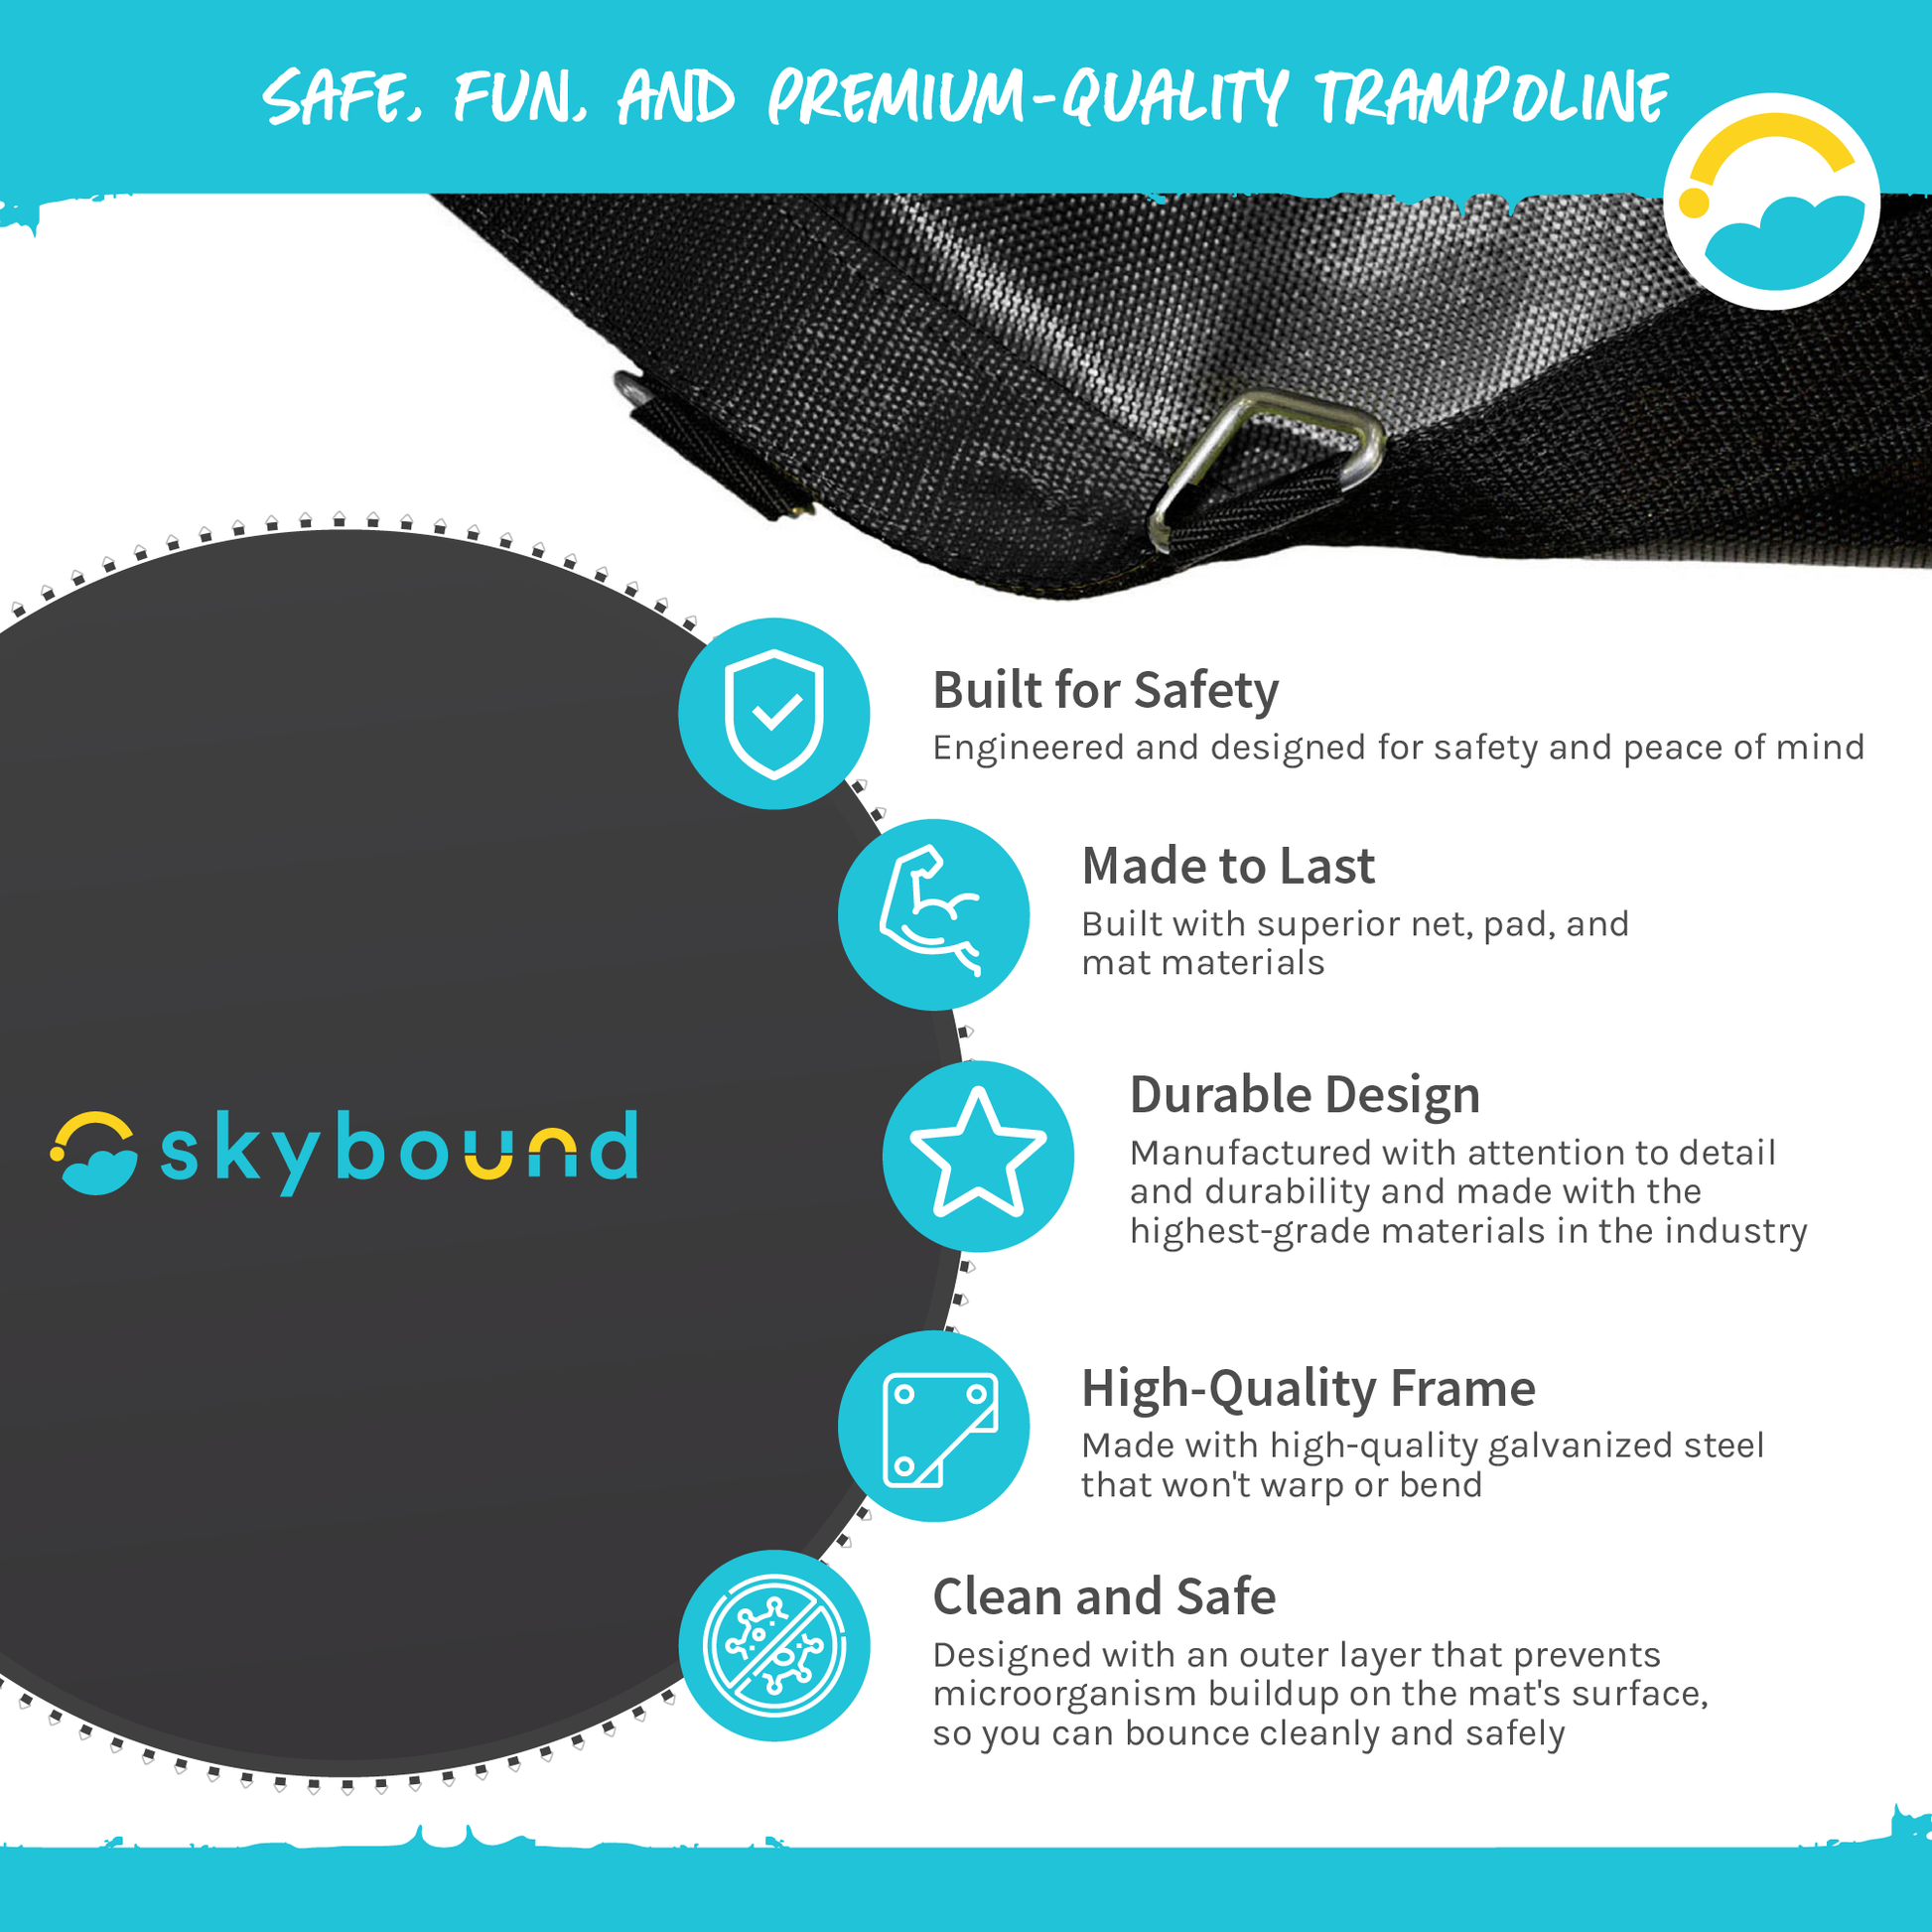 Safe, Fun, and Premium-Quality Trampoline:  Built for Safety, Made to Last, Durable Design, High-Quality Frame, Clean and Safe.  